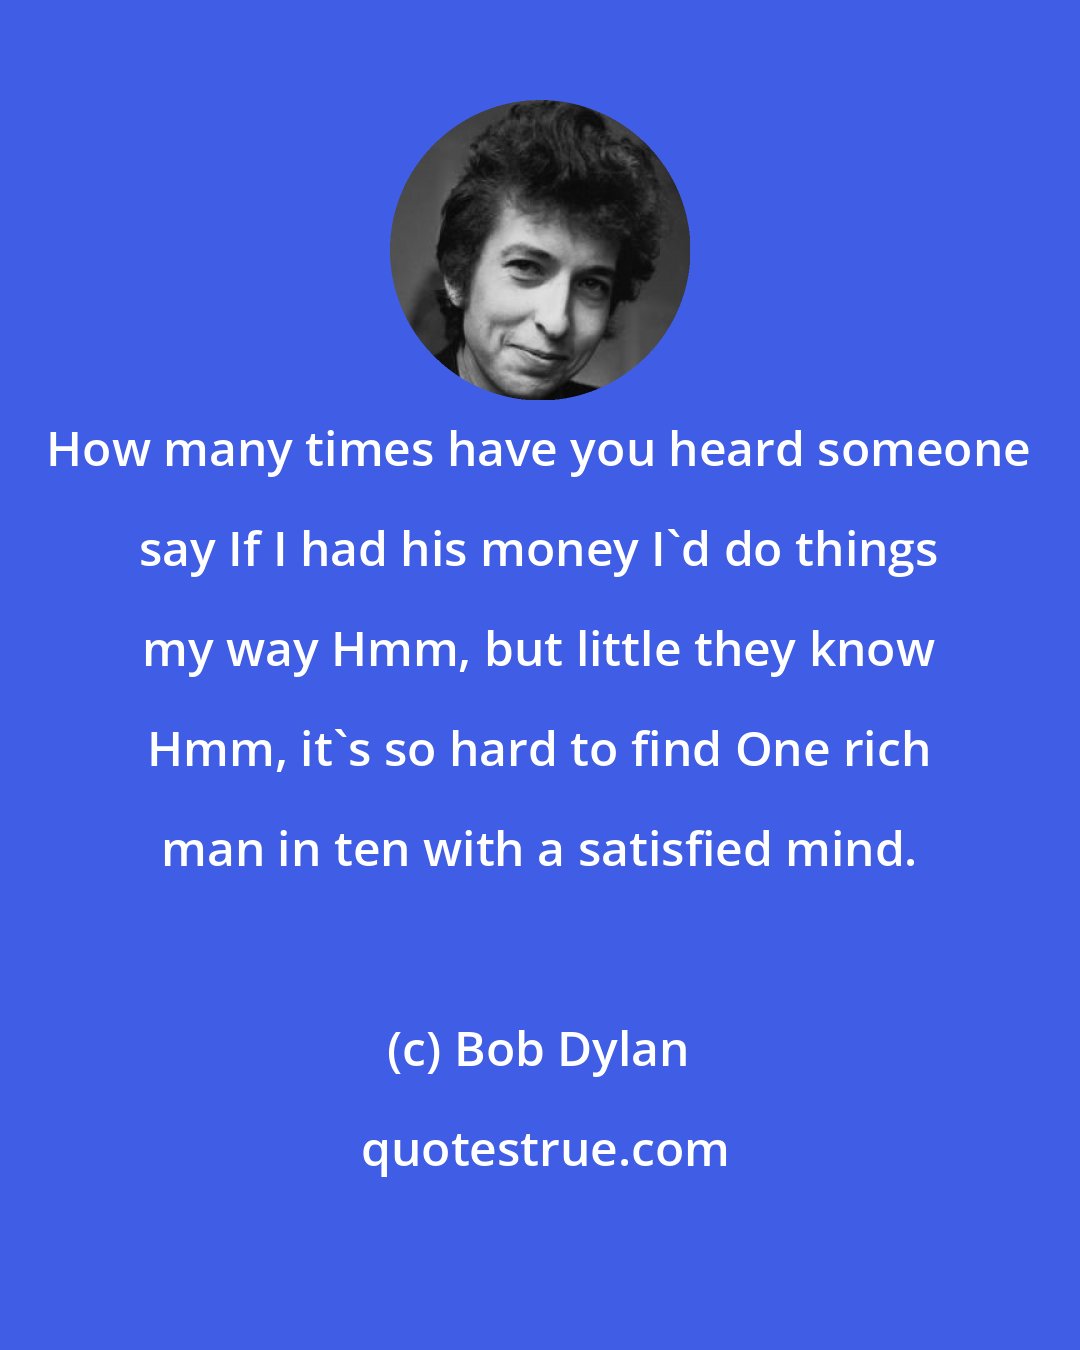 Bob Dylan: How many times have you heard someone say If I had his money I'd do things my way Hmm, but little they know Hmm, it's so hard to find One rich man in ten with a satisfied mind.